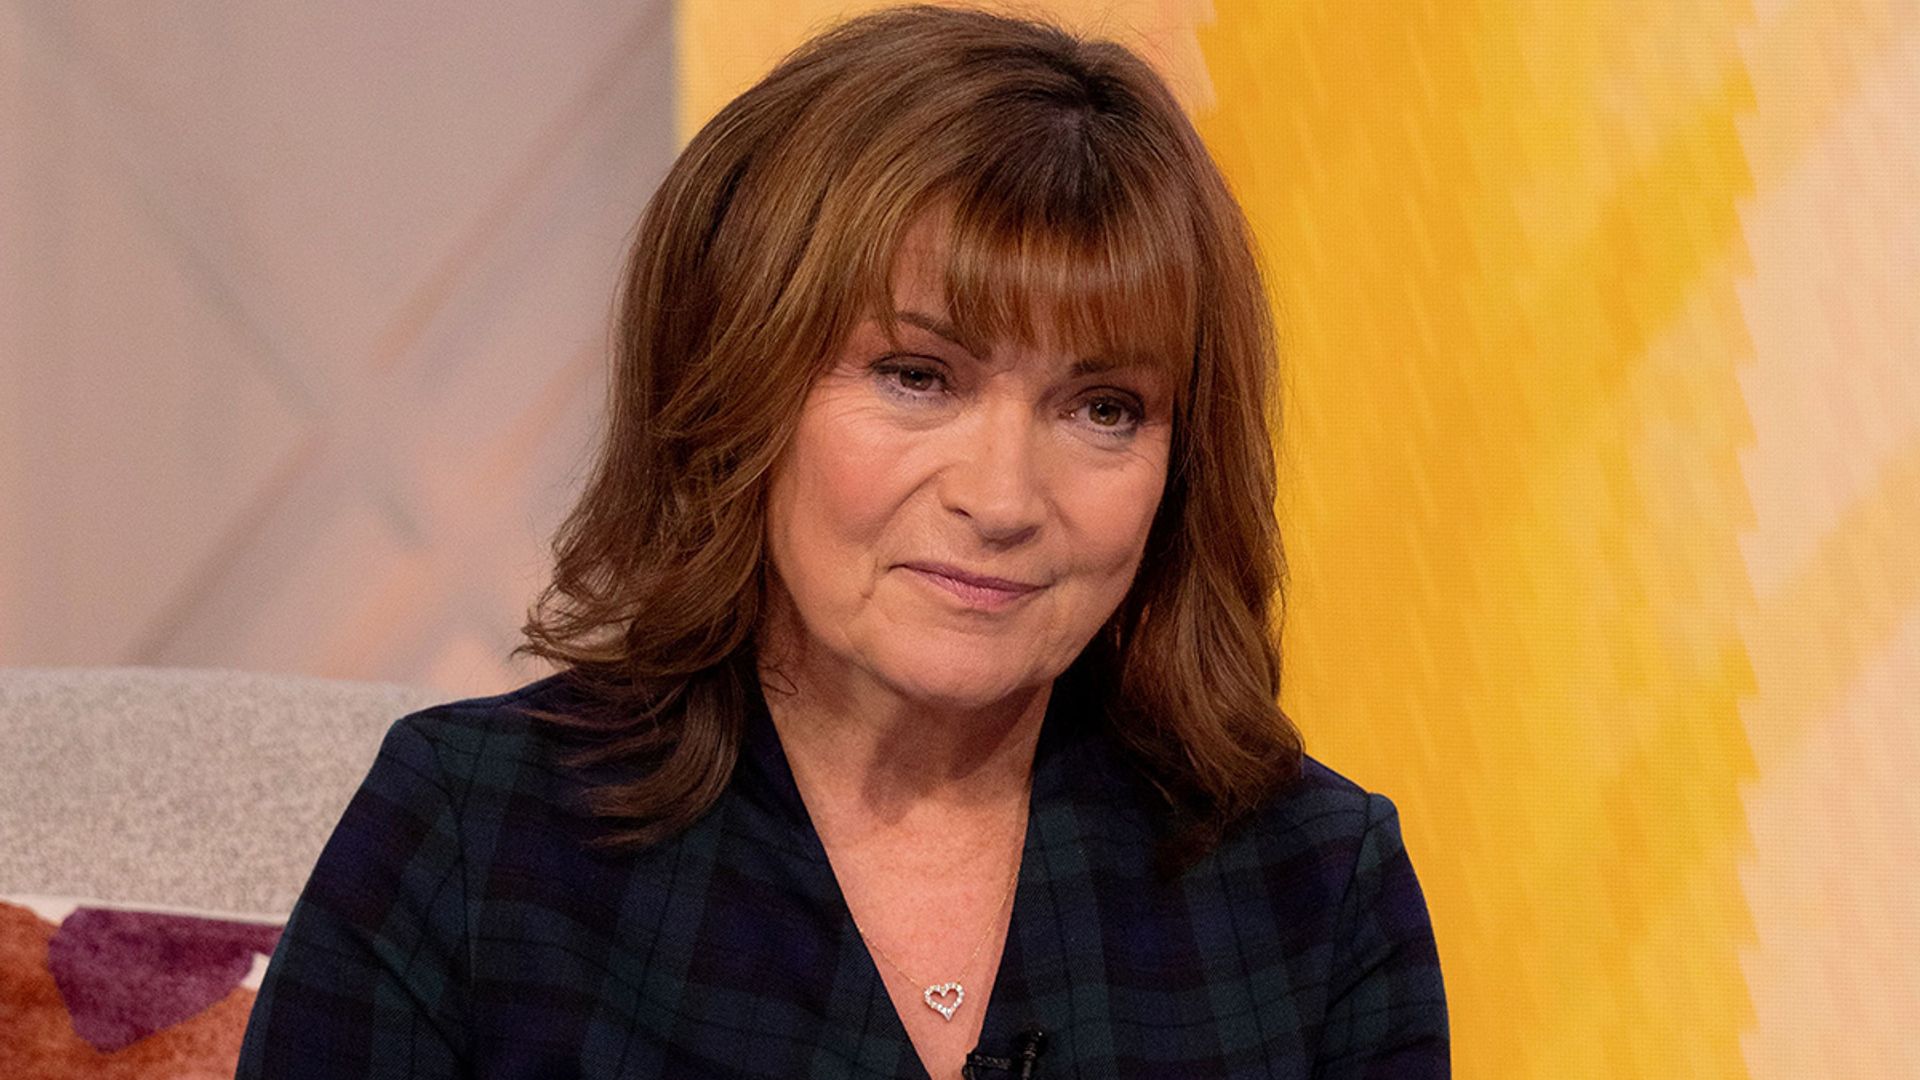 Lorraine Kelly shares heartbreaking throwback with 'sadly missed' colleague